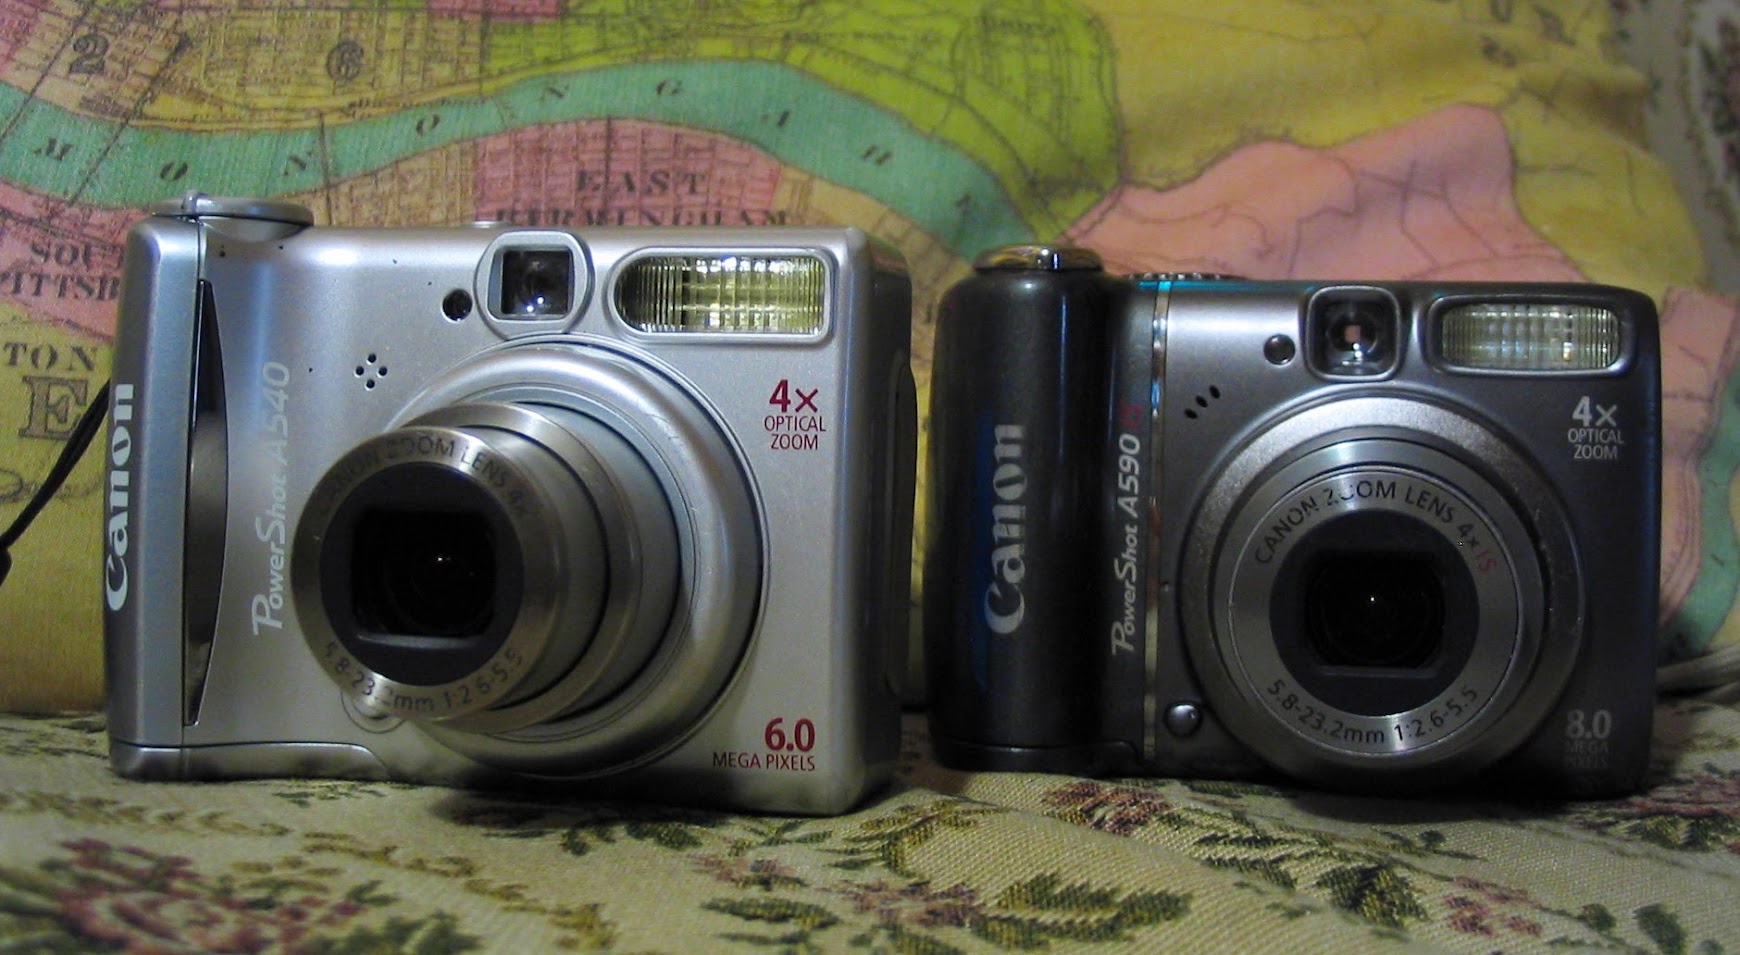 Canon PowerShot A540 and A590